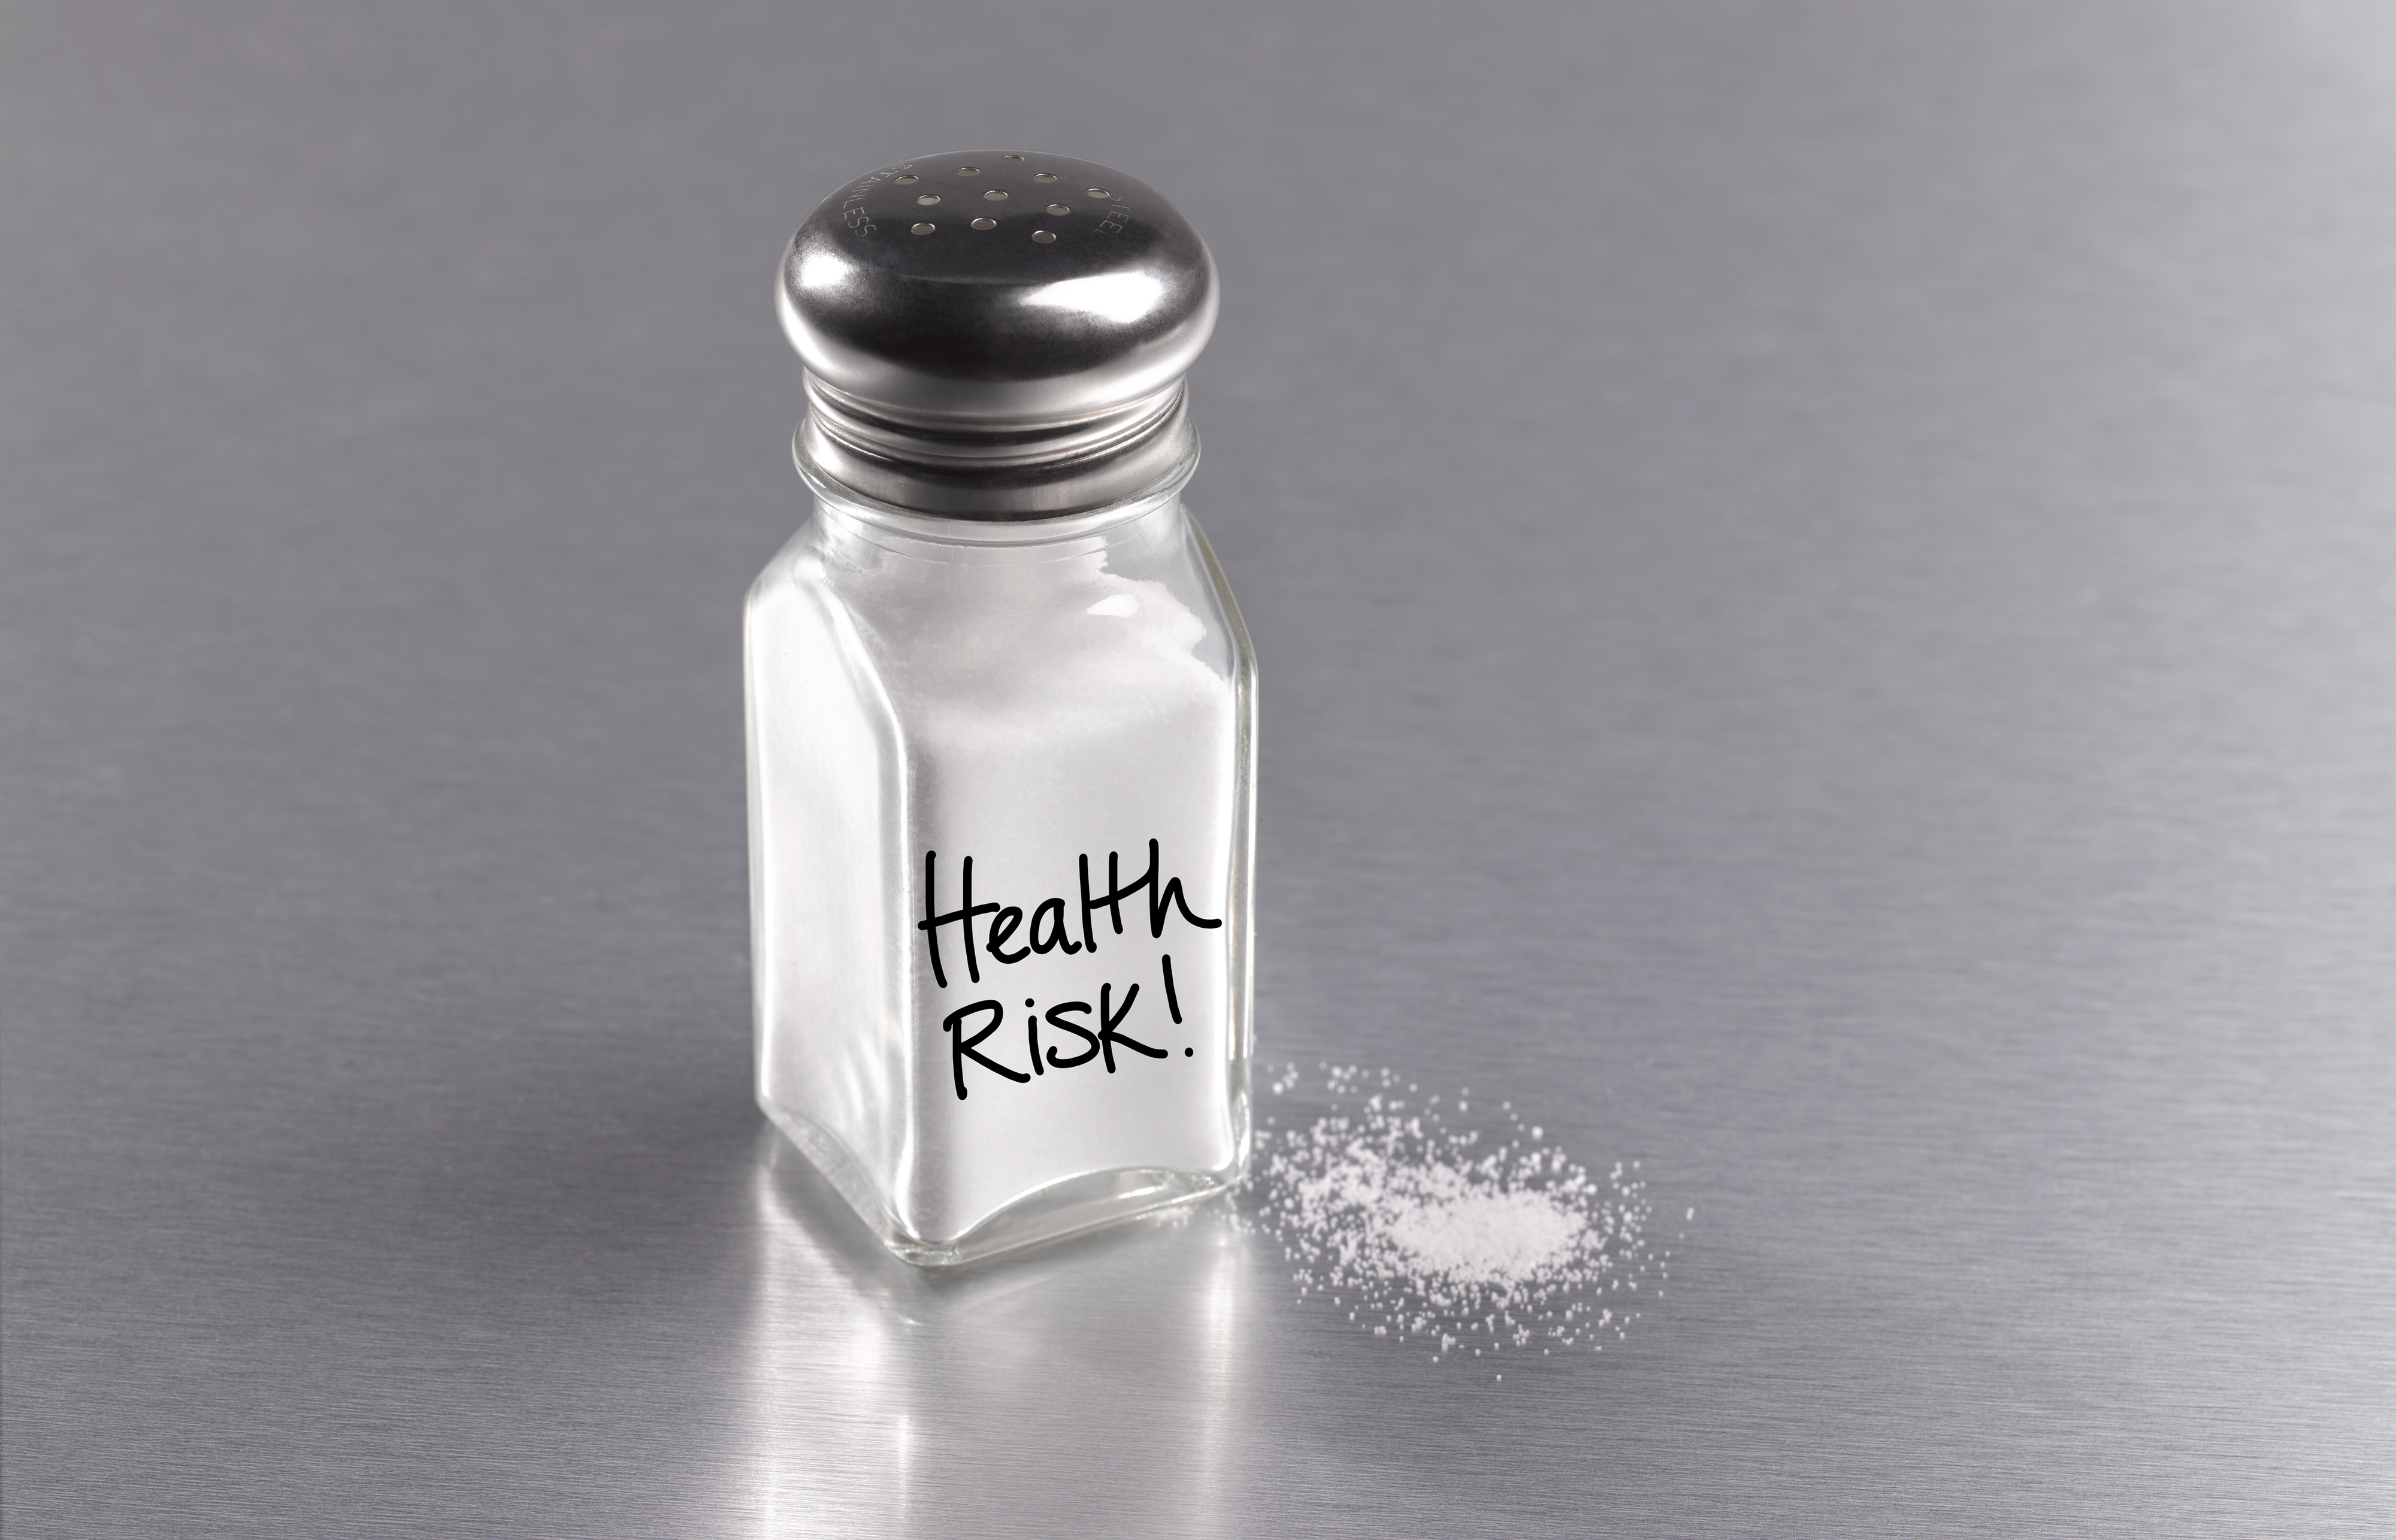 Salt shaker on a table with &quot;Health Risk!&quot; written on it, some salt spilled beside it